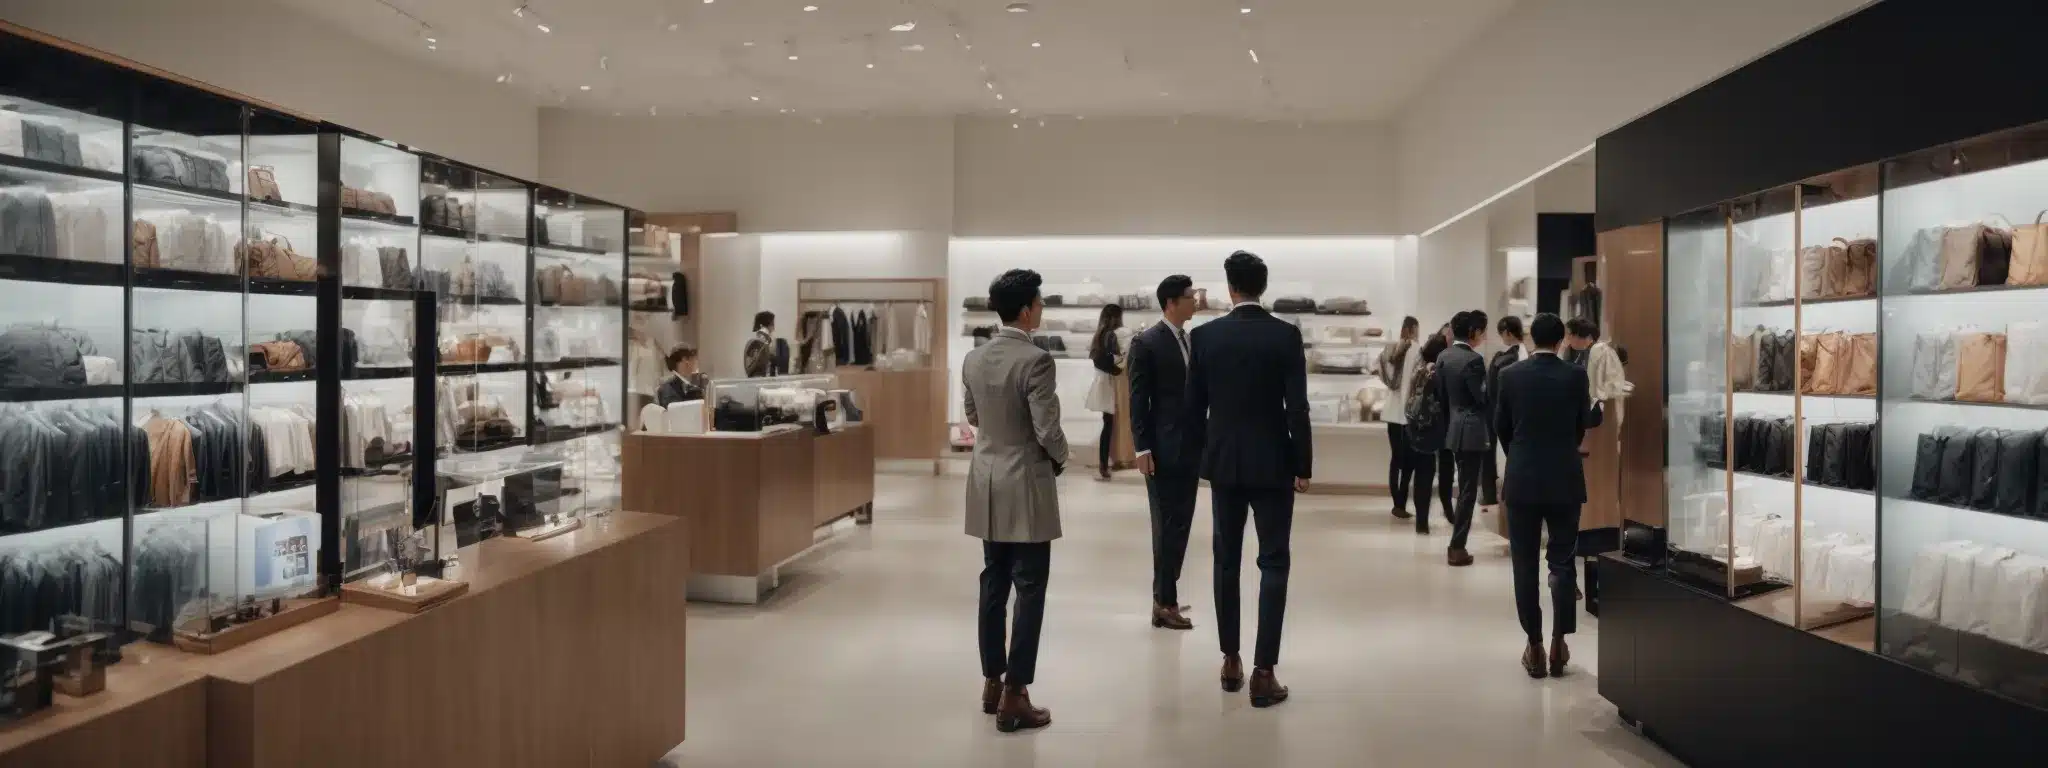 A Ceo At The Helm Of A Sleek Retail Store, Greeting Diverse Customers With A Glowing, Interactive Display That Adapts To Individual Preferences.